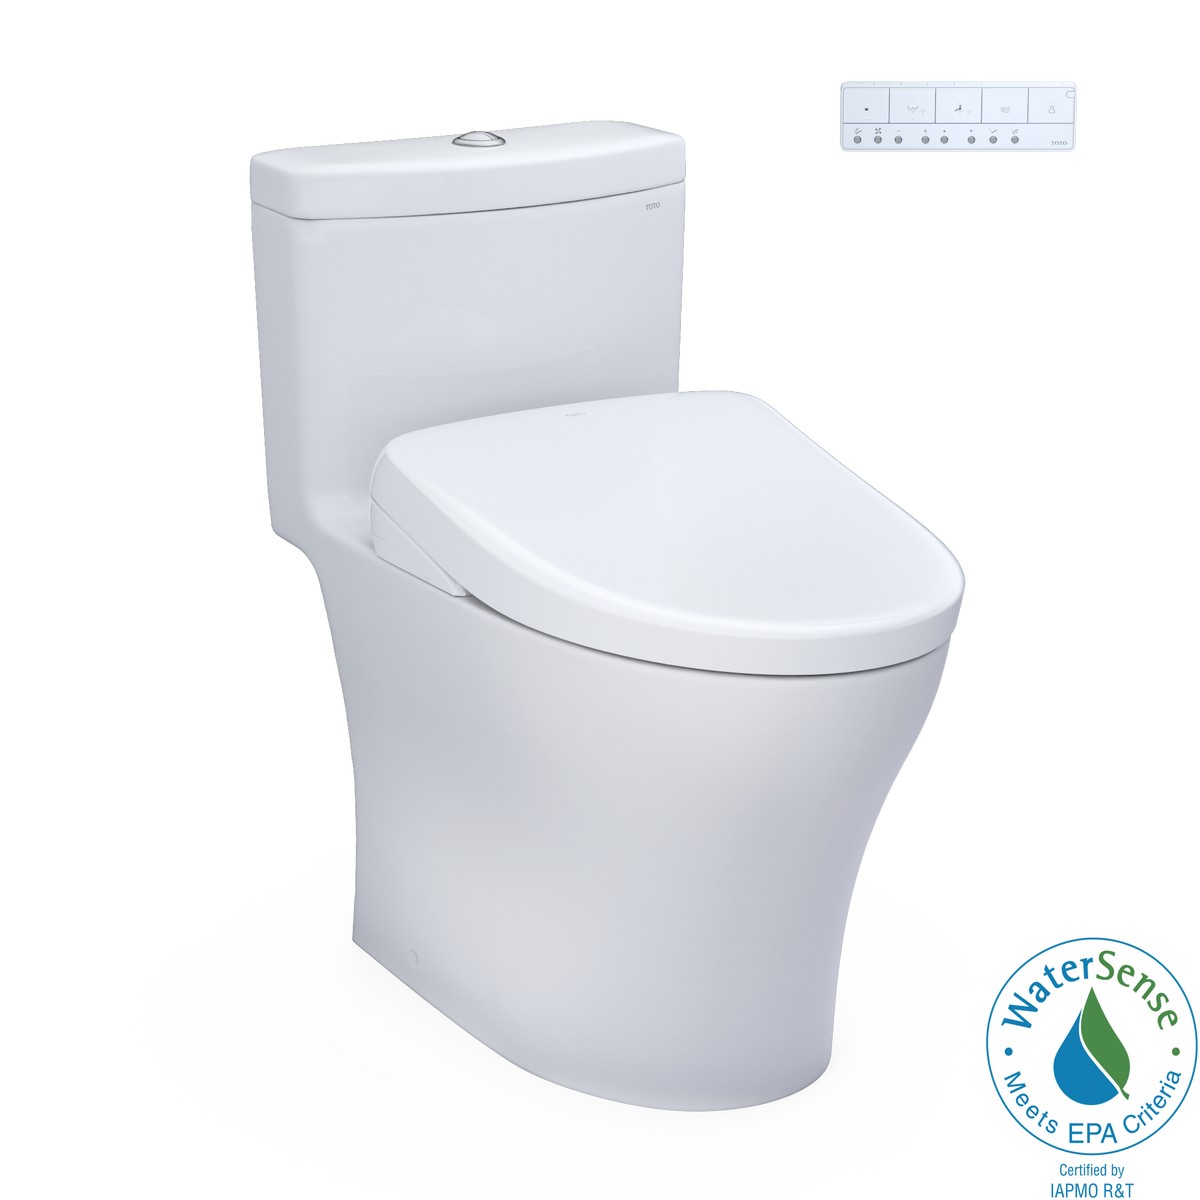 TOTO MW6464736CEMFG#01 WASHLET+ AQUIA IV 1.28 AND 0.9 GPF ONE PIECE DUAL FLUSH ELONGATED TOILET WITH WASHLET S7A ELECTRIC BIDET SEAT IN COTTON WHITE